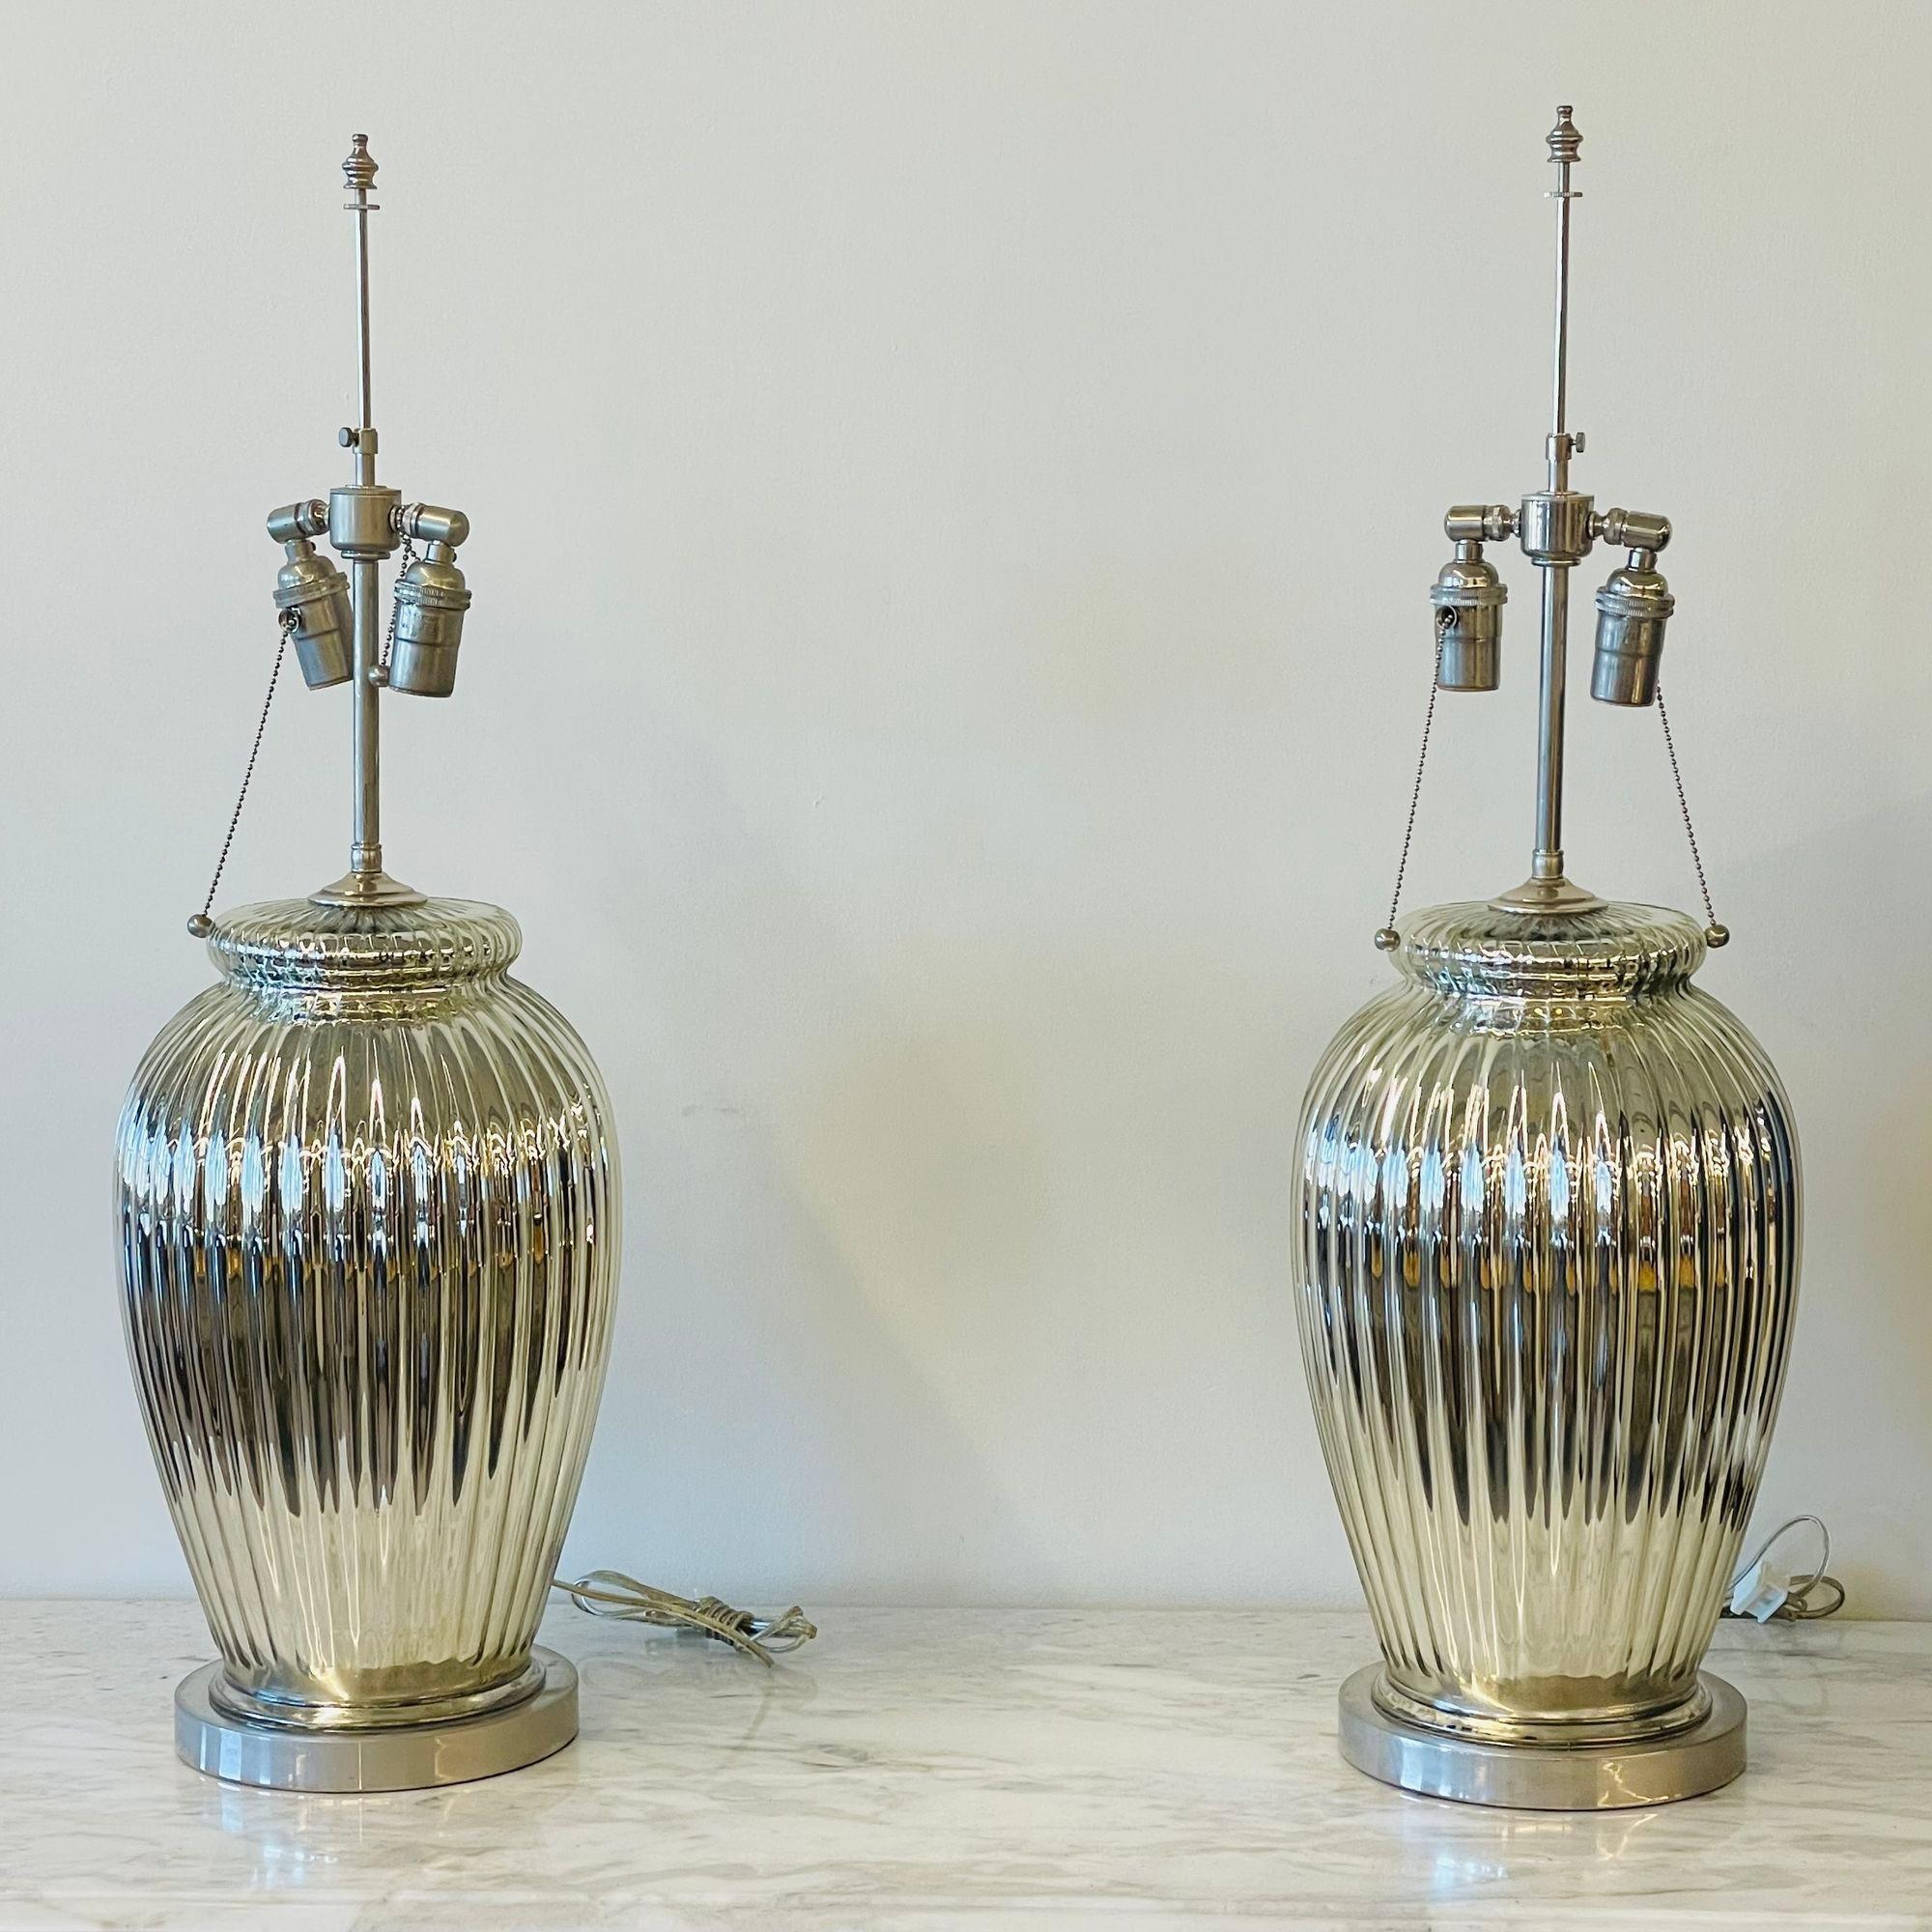 Pair of Mid-Century Modern Silver Table Lamps, Mercury Glass, Brass, Urn-Shaped For Sale 4